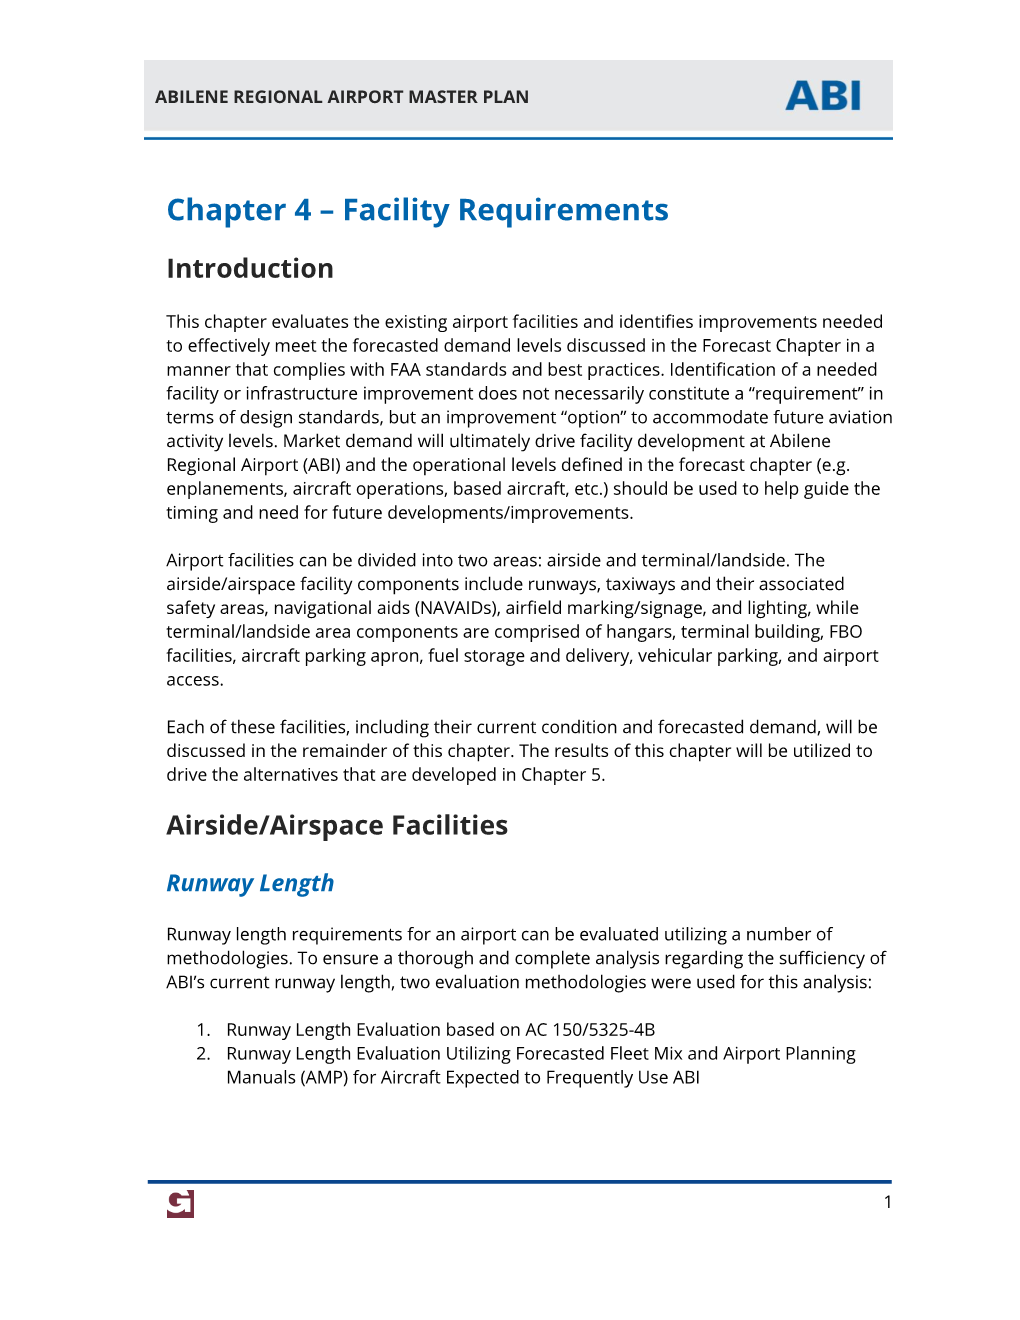 Chapter 4 – Facility Requirements